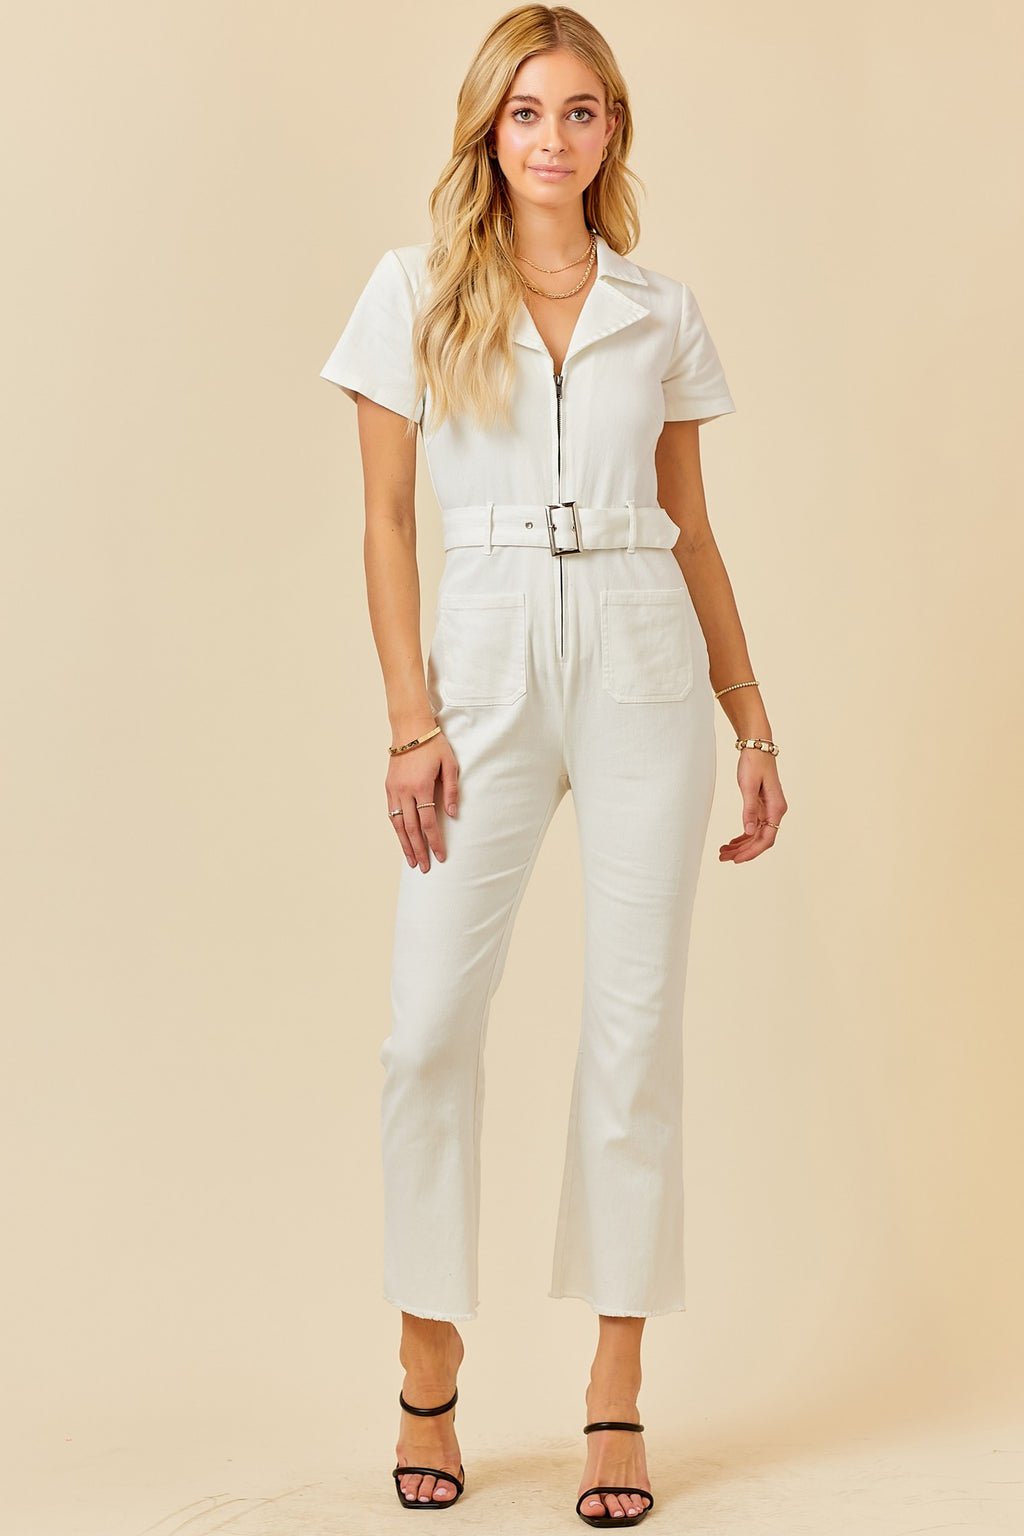 The Hustle Zip Front Jumpsuit with Belt in White